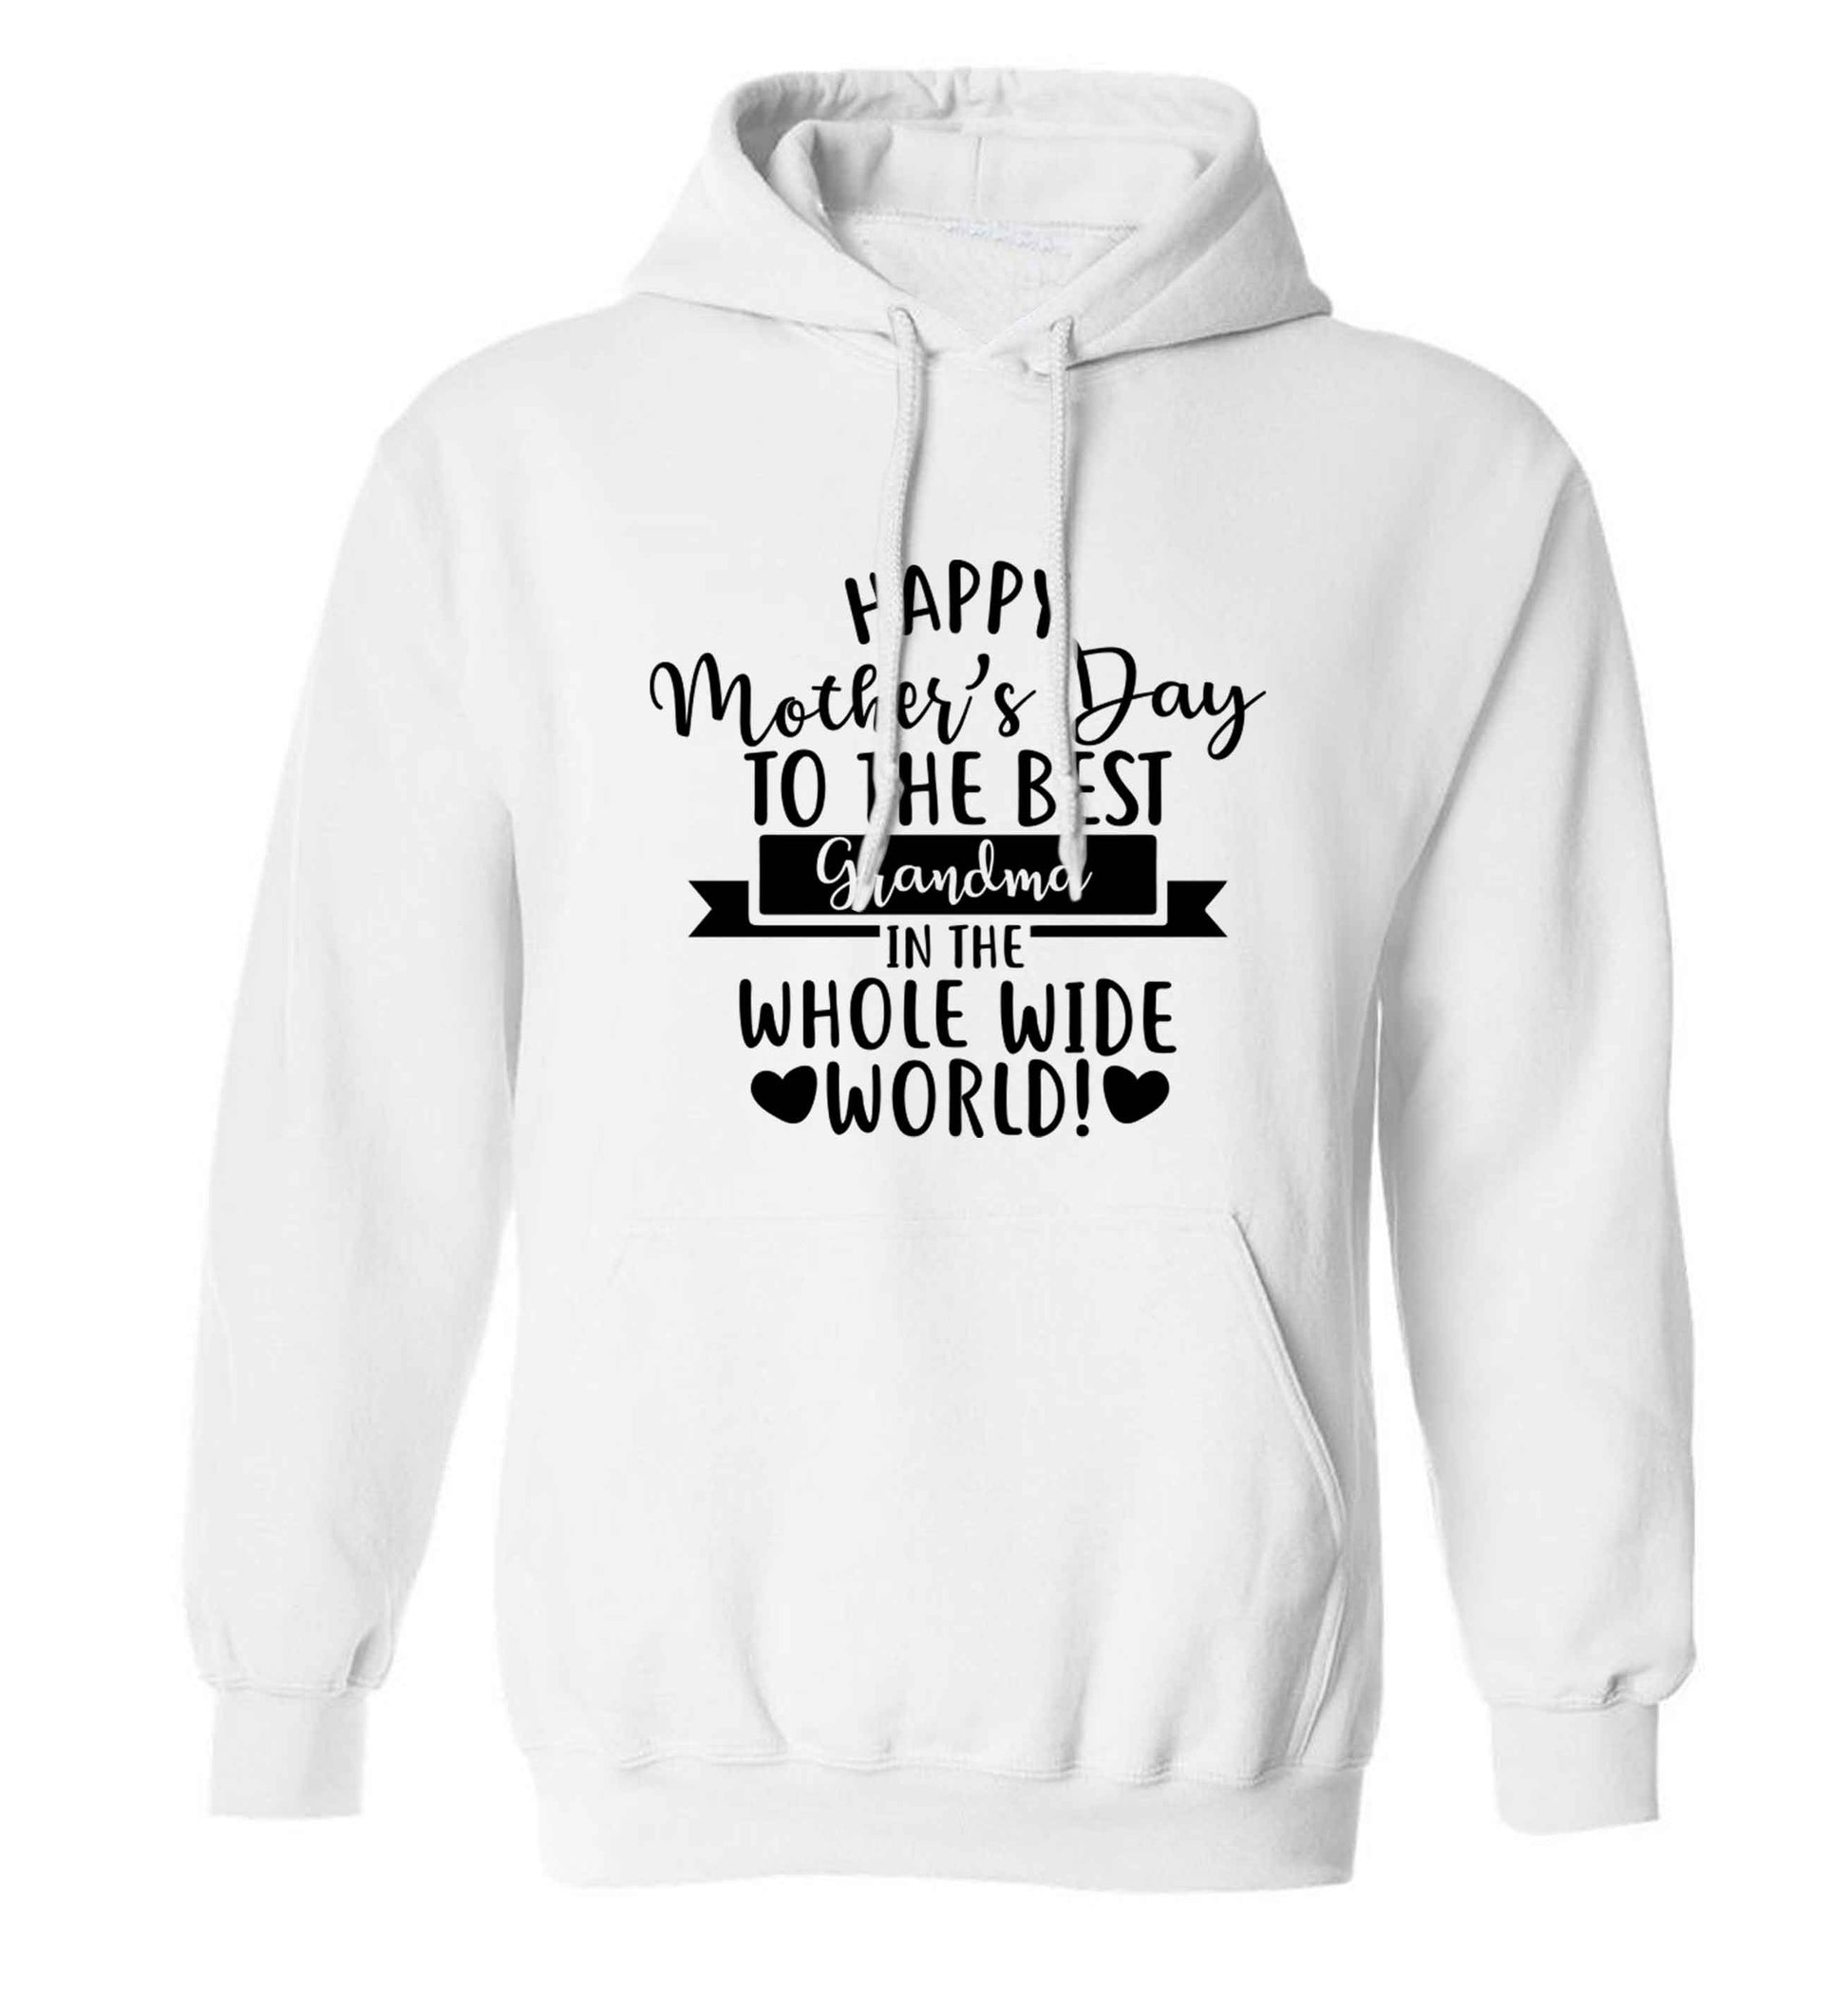 Happy mother's day to the best grandma in the world adults unisex white hoodie 2XL